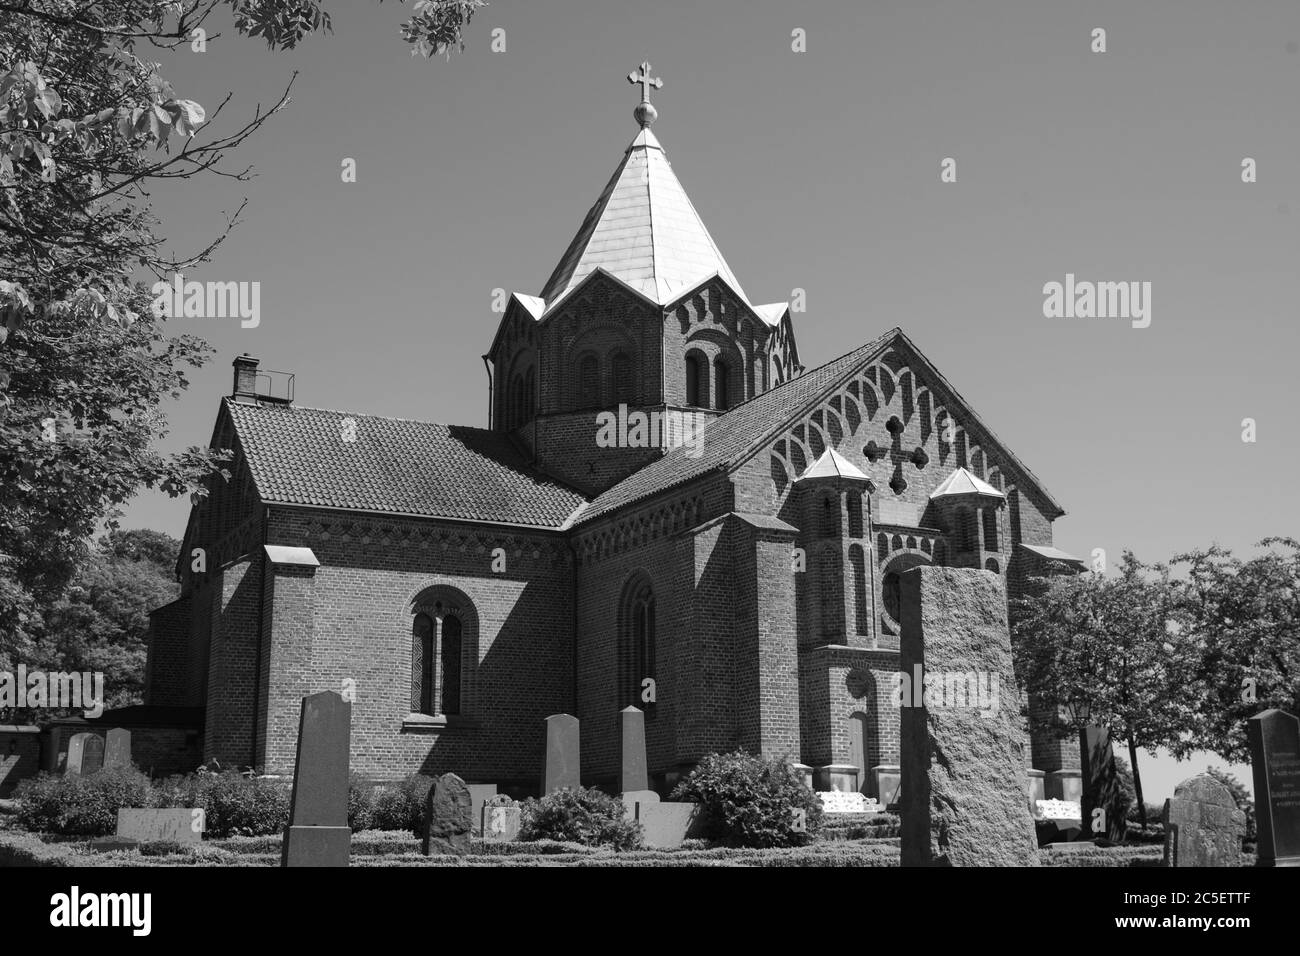 A Gallows hill: A Church: The story of Tullstorp. Posted by the Hans-Chr. Quist. Photographer: Rita Segstedt & H.C. Quist. Stock Photo